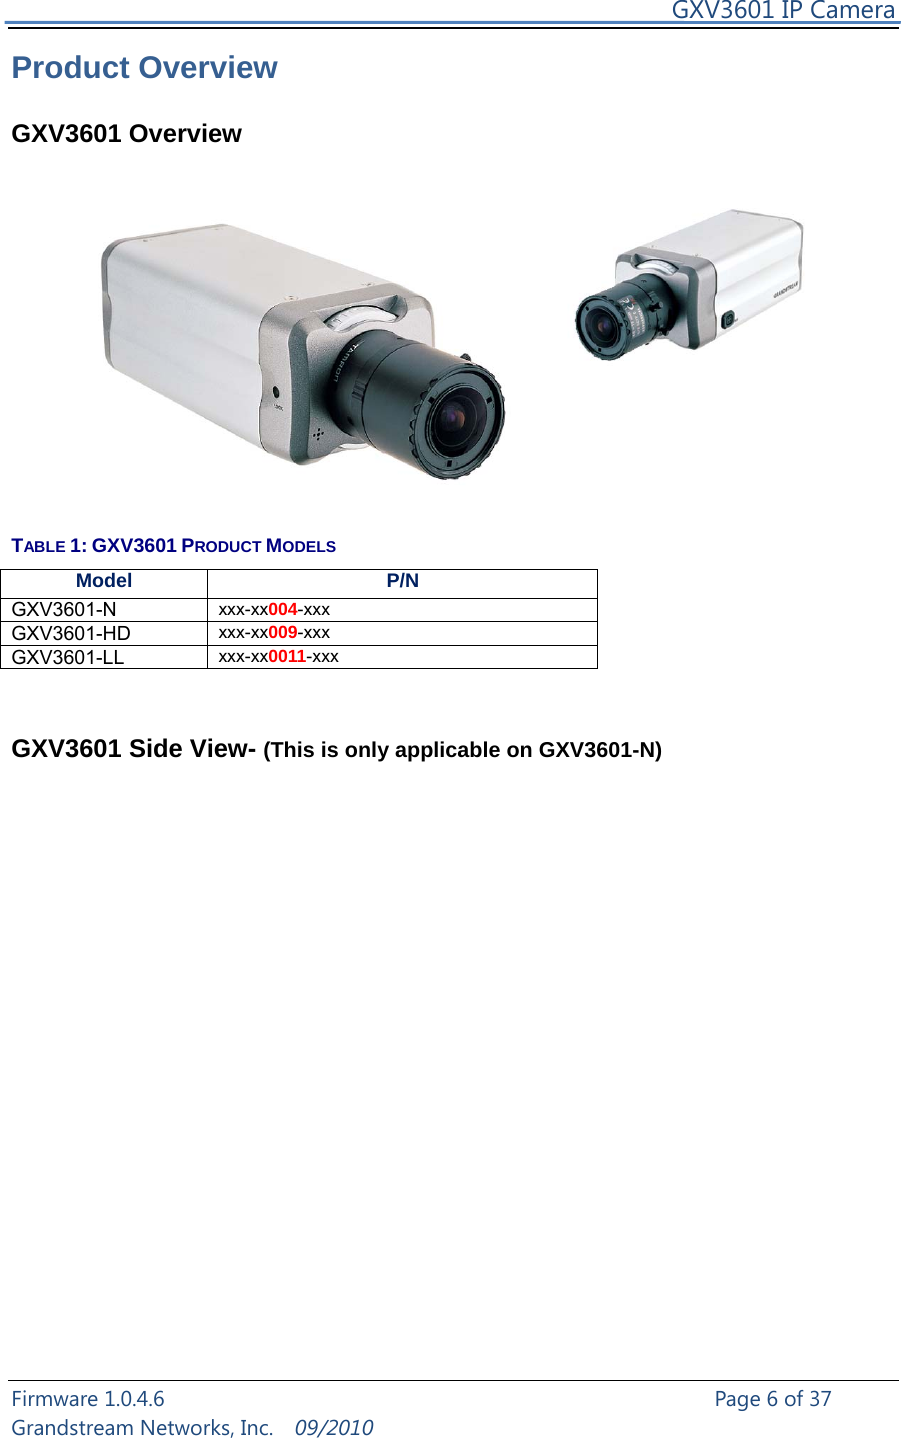     GXV3601 IP Camera Firmware 1.0.4.6                                                   Page 6 of 37    Grandstream Networks, Inc.  09/2010  Product Overview  GXV3601 Overview    TABLE 1: GXV3601 PRODUCT MODELS Model P/NGXV3601-N  xxx-xx004-xxx  GXV3601-HD  xxx-xx009-xxx GXV3601-LL  xxx-xx0011-xxx   GXV3601 Side View- (This is only applicable on GXV3601-N)  